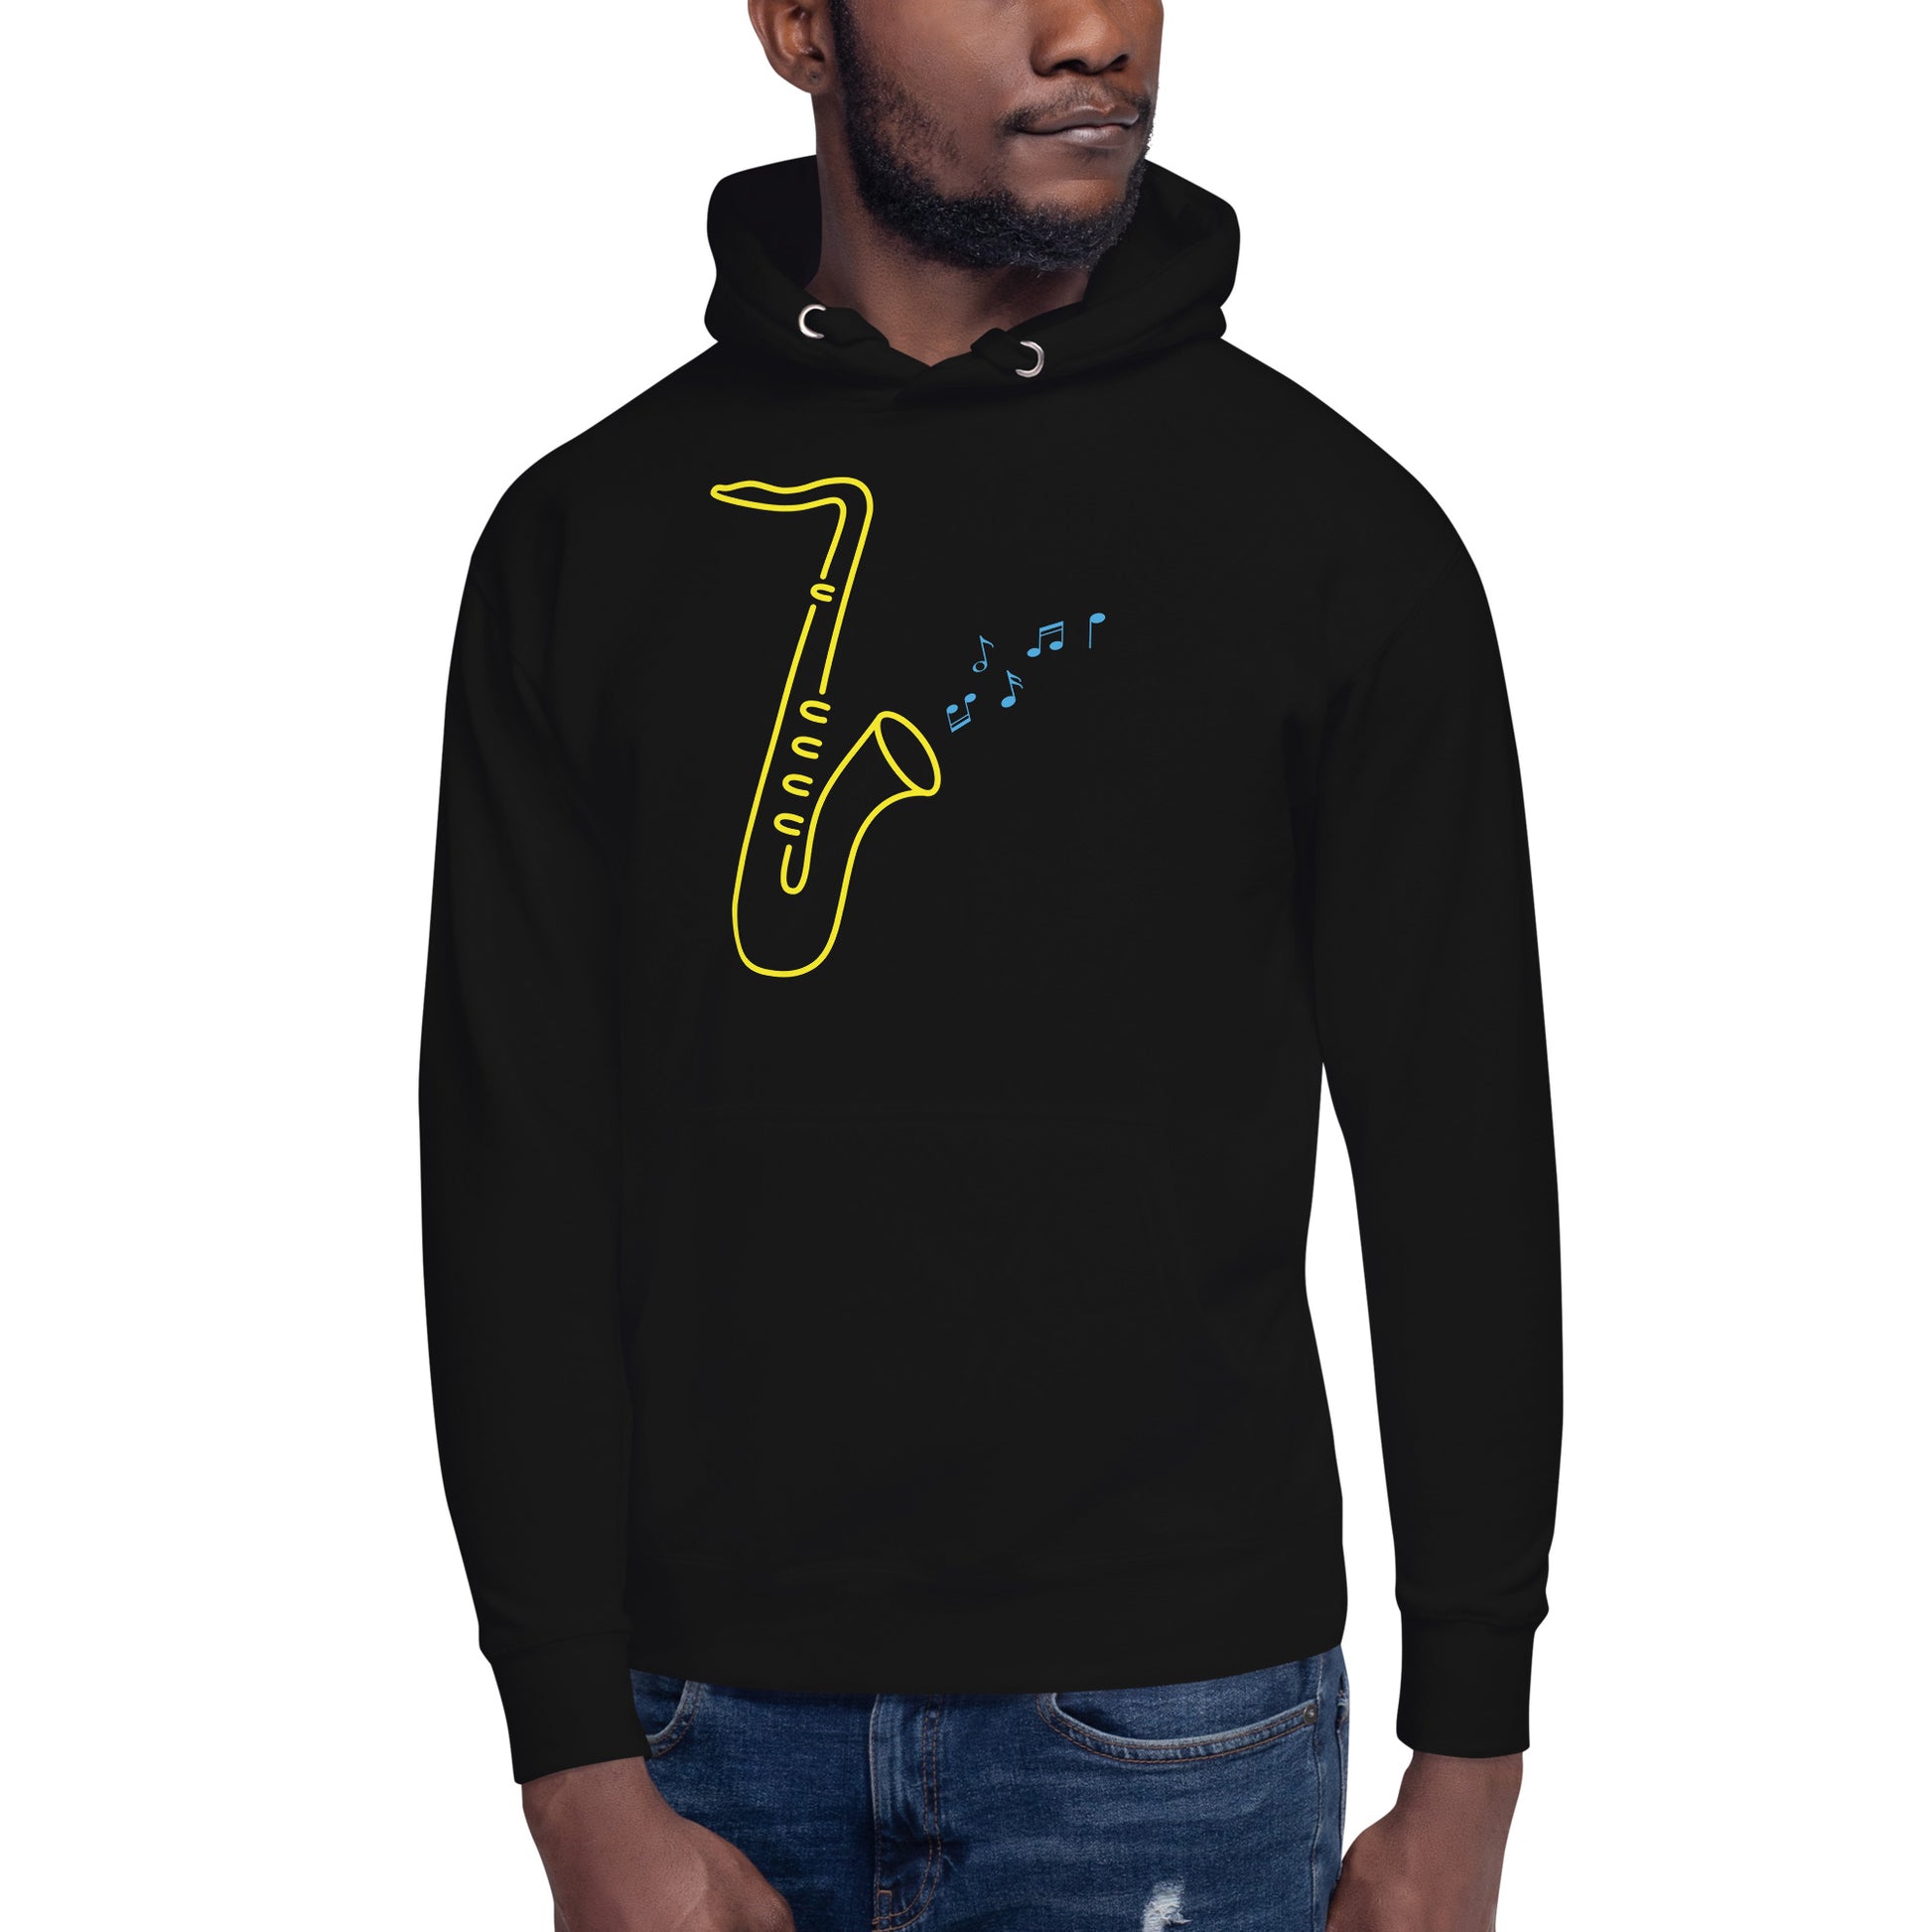 Black Hoodie with a vibrant neon design of a yellow saxophone and blue musical notes, from the TEQNEON Music Box collection